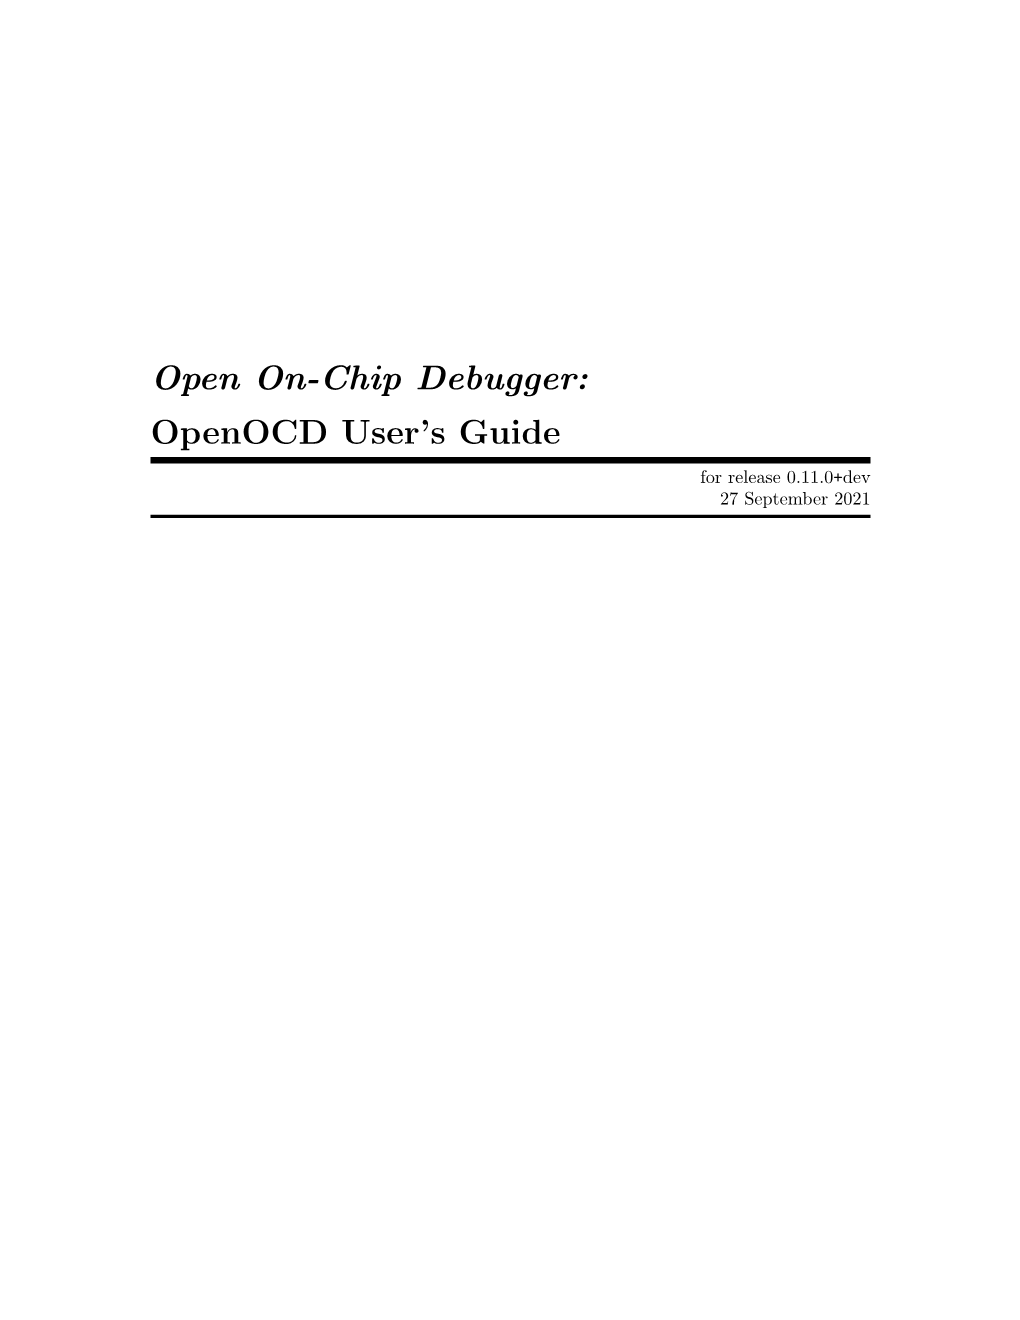 Open On-Chip Debugger: Openocd User's Guide